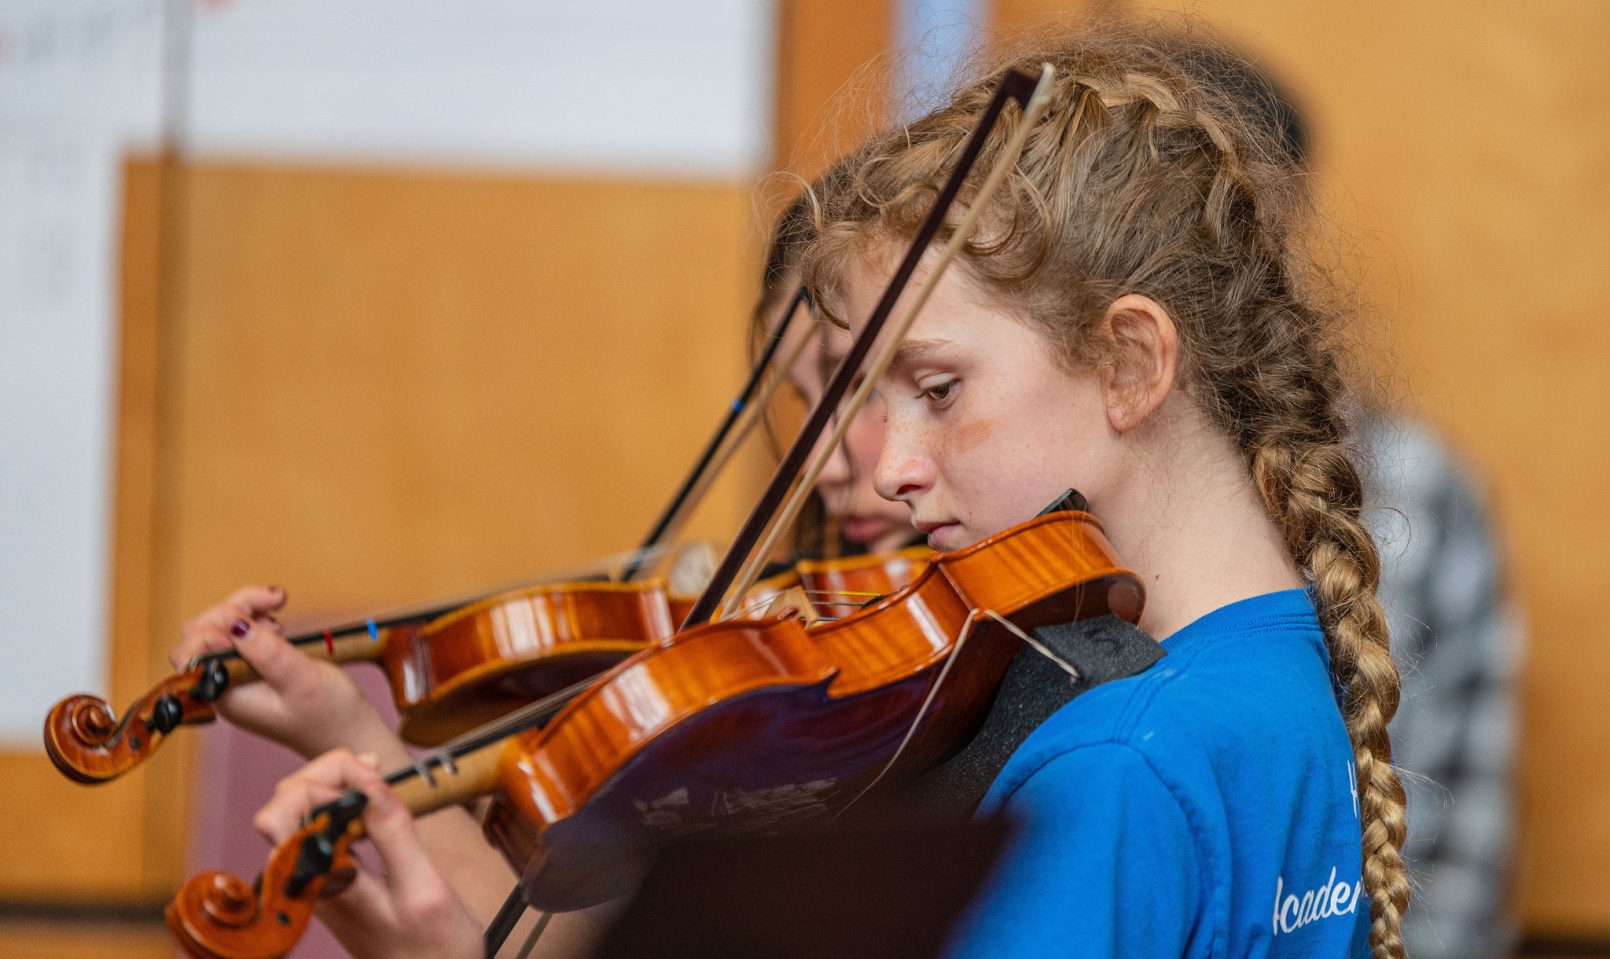 two girls playing violins sitting in a row; student in foreground wears a long braid and blue shirt